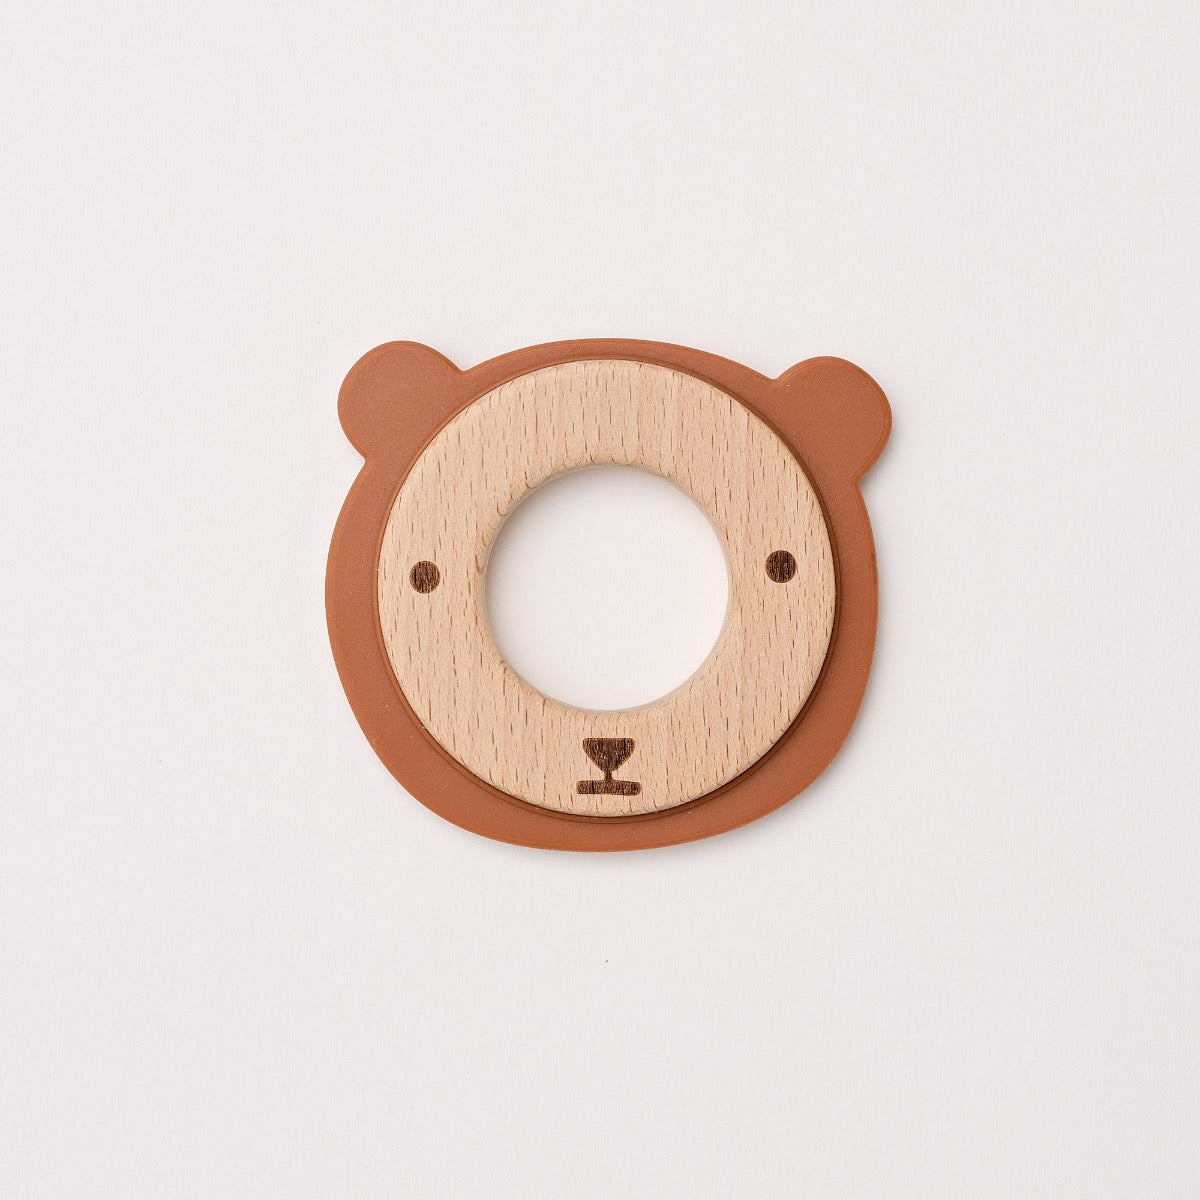 Over The Dandelions-Bailey the Bear Teether Wood + Silicone